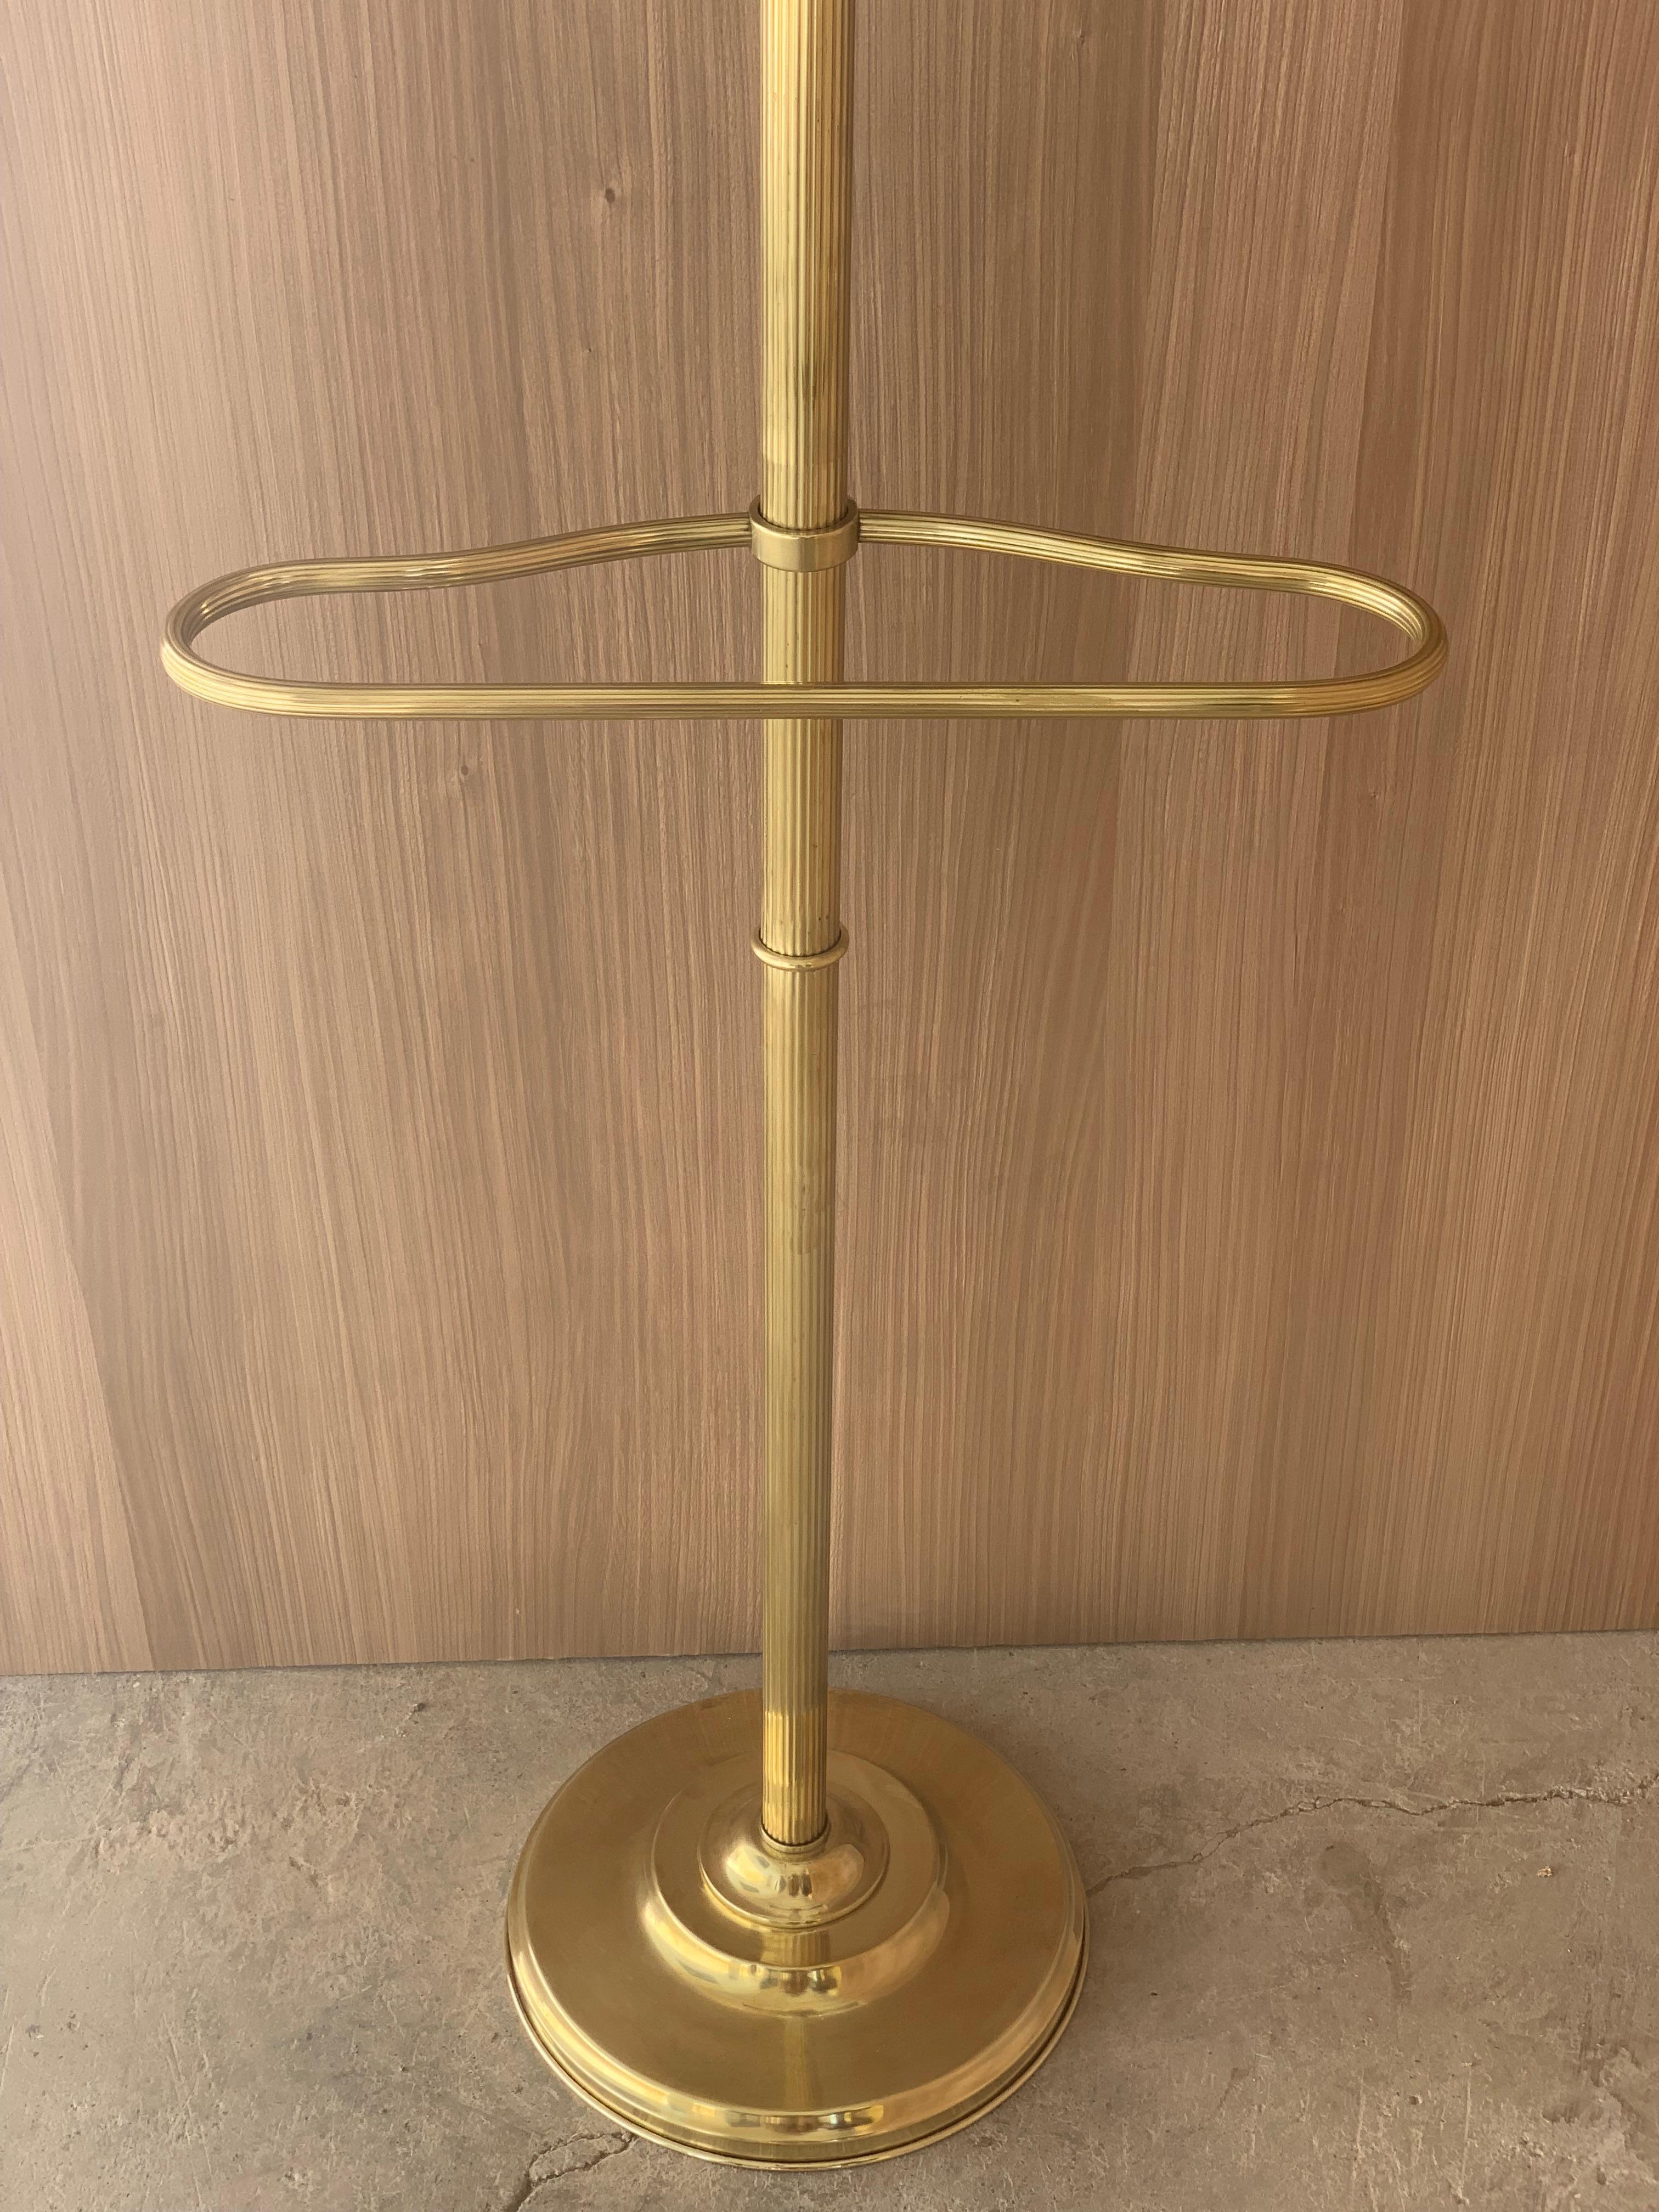 1970s Italian Hollywood Regency Brass and Wood Valet Stand Dressboy with Mirror 8